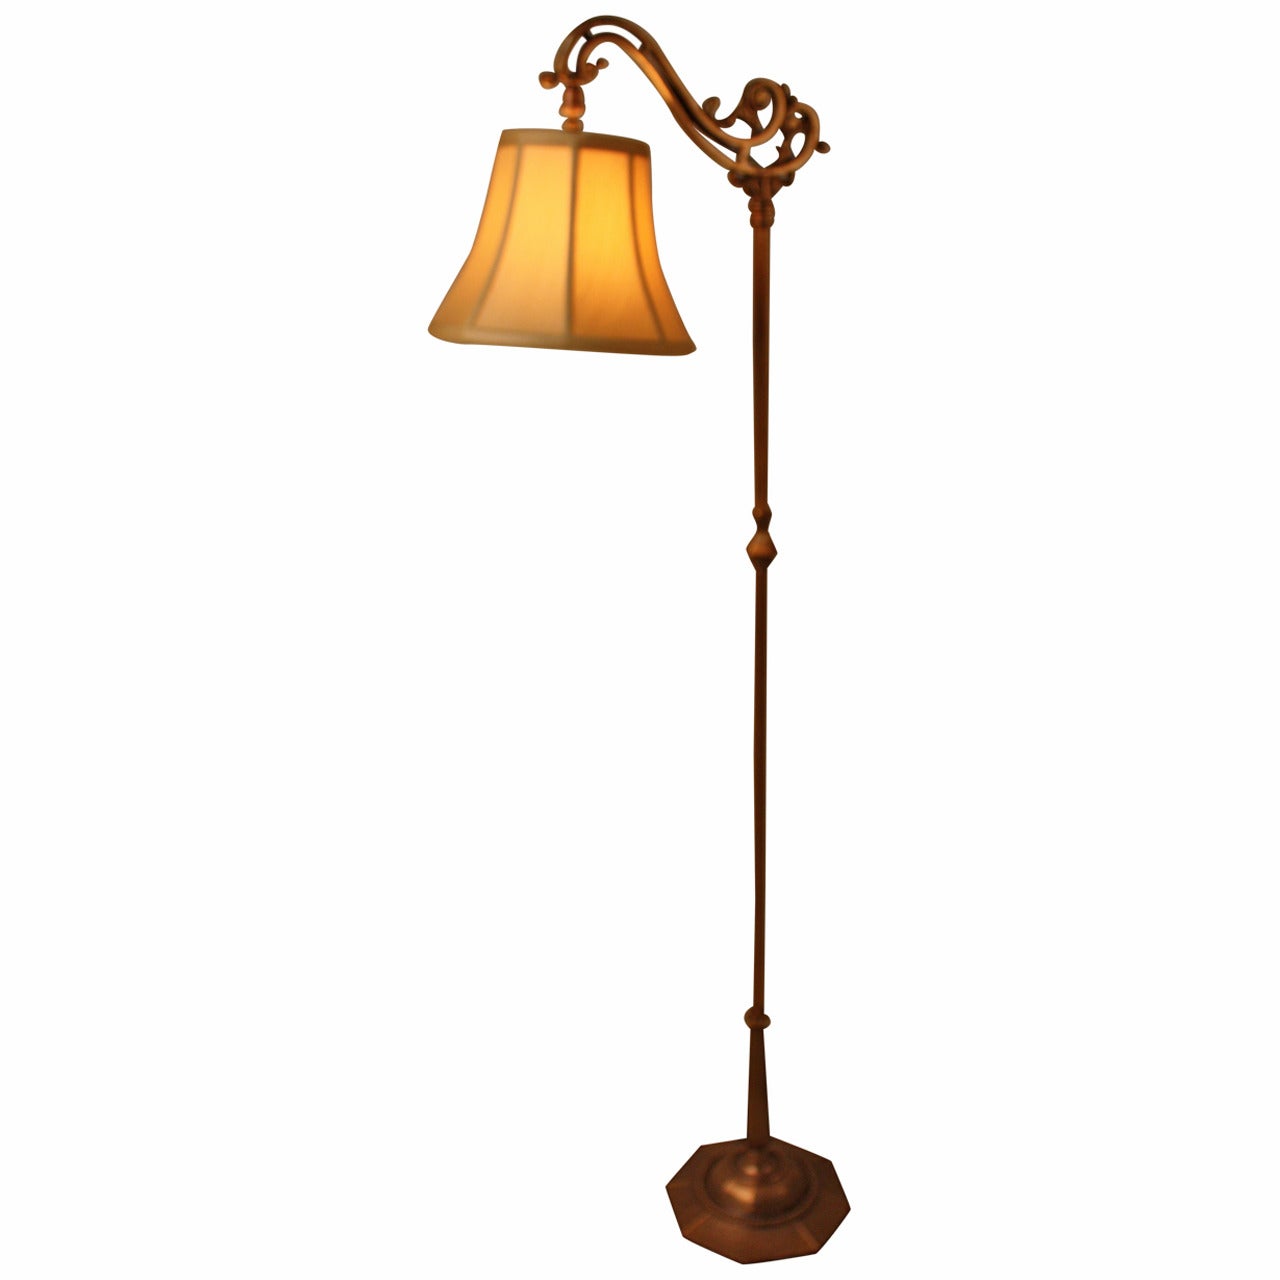 American Floor Lamp by Rembrandt Lamp Company